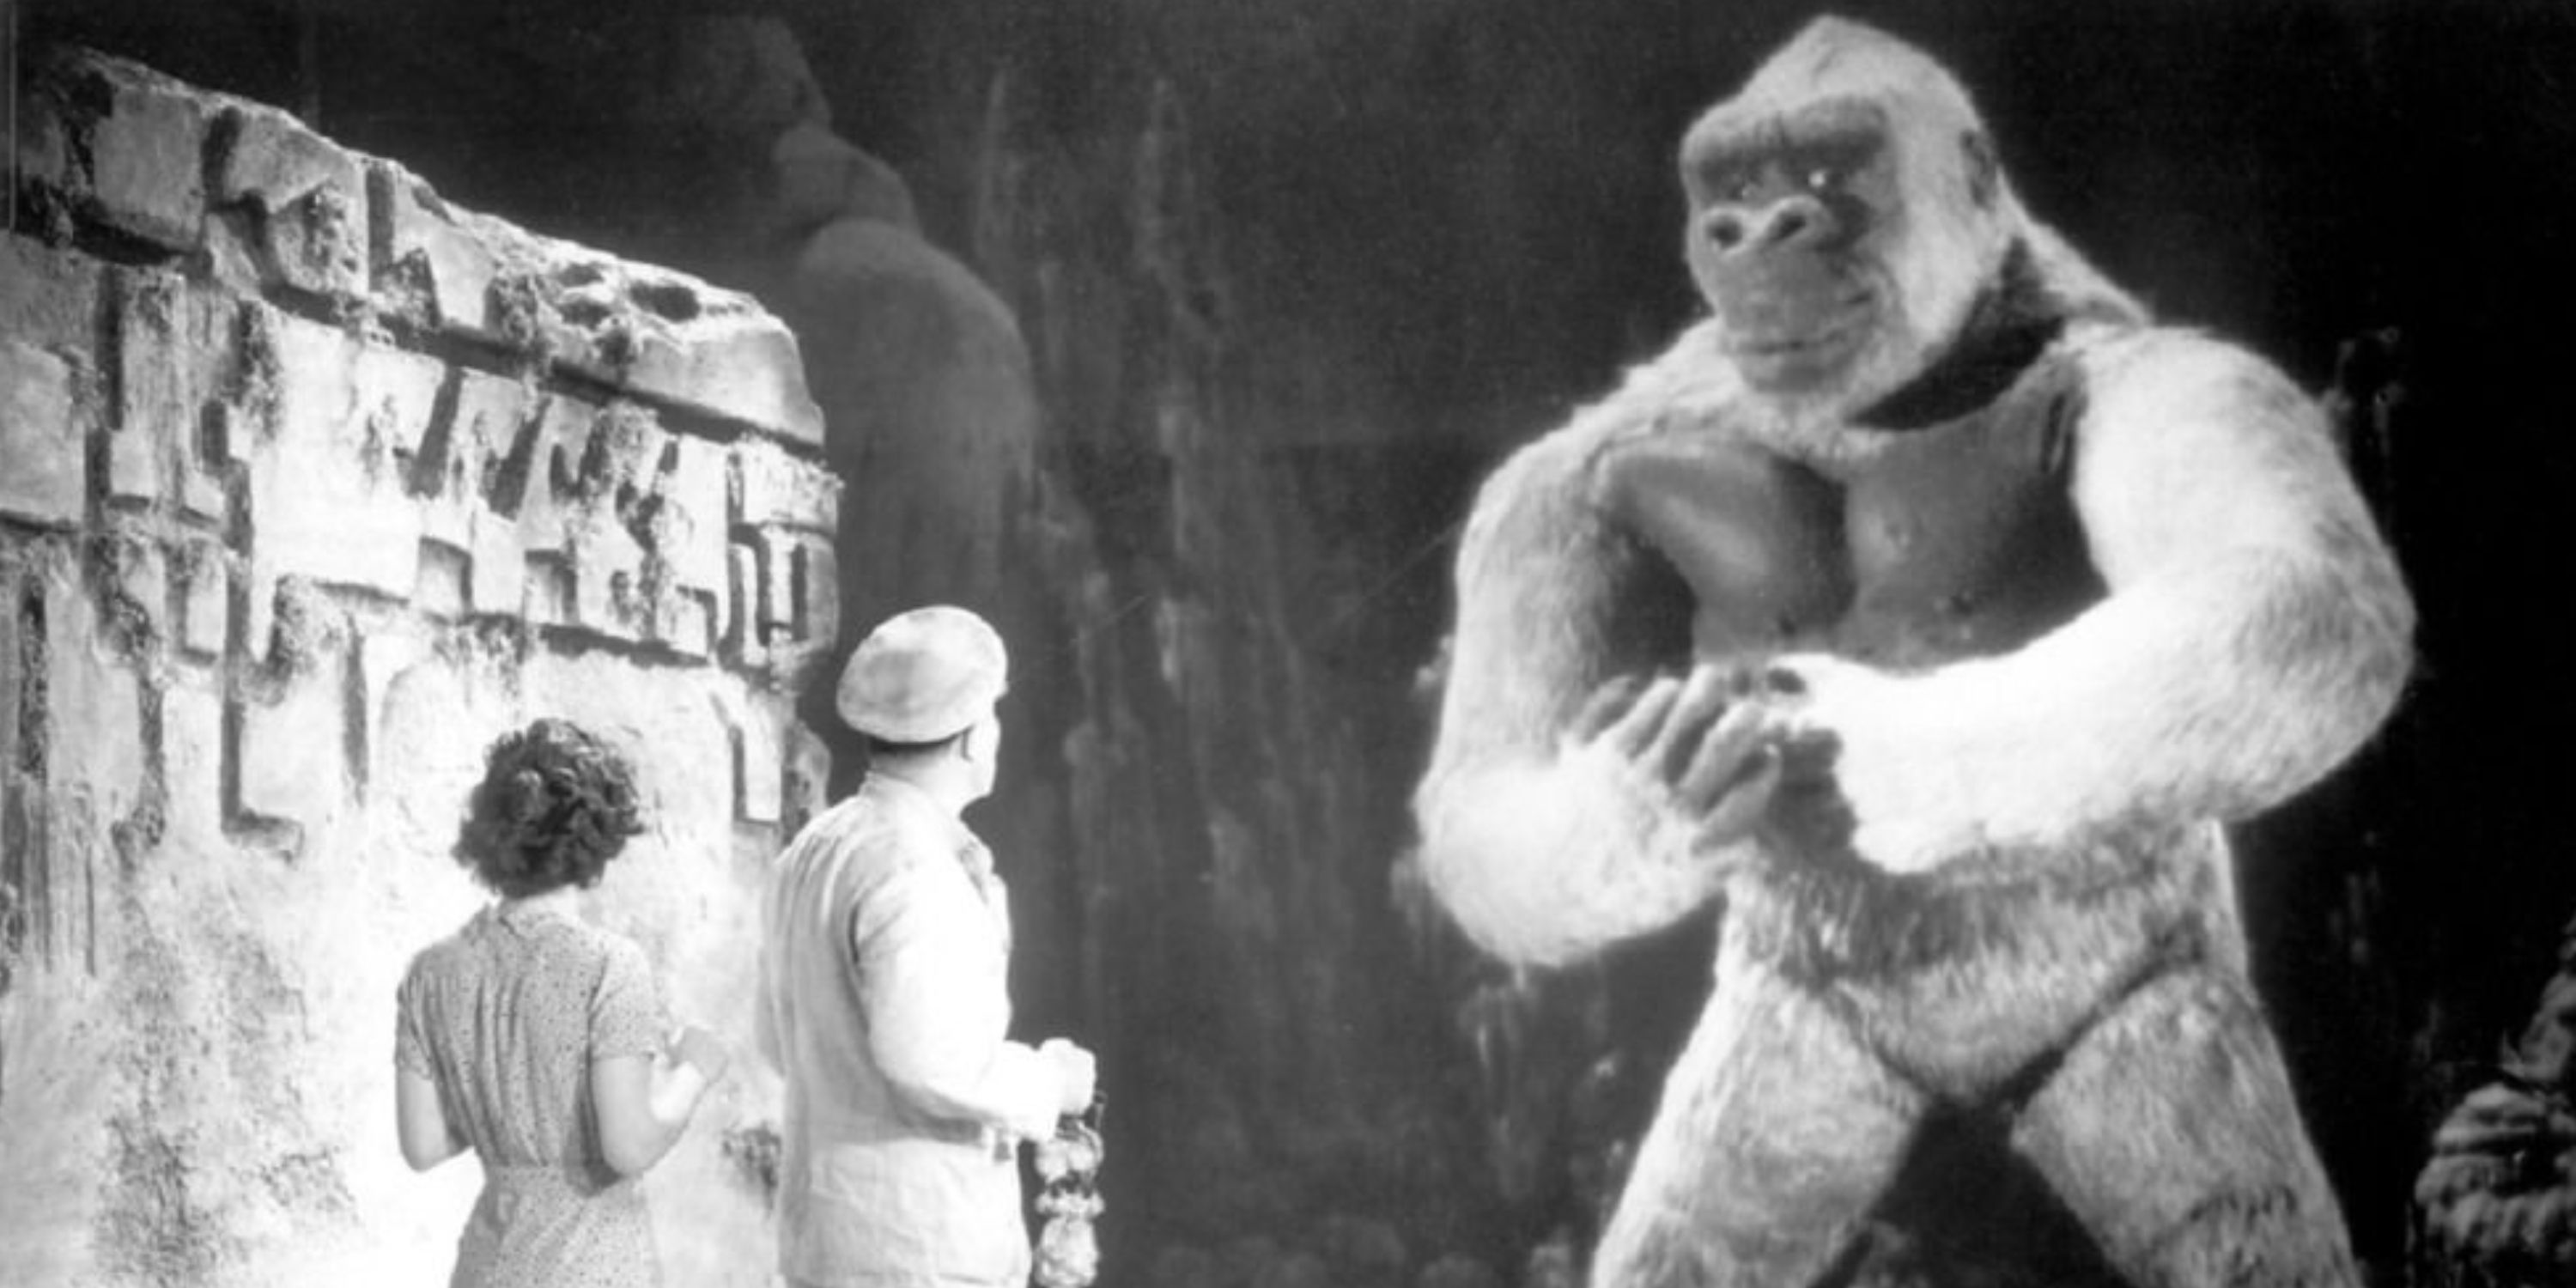 Son Of Kong towers over a man and woman in the 1933 movie